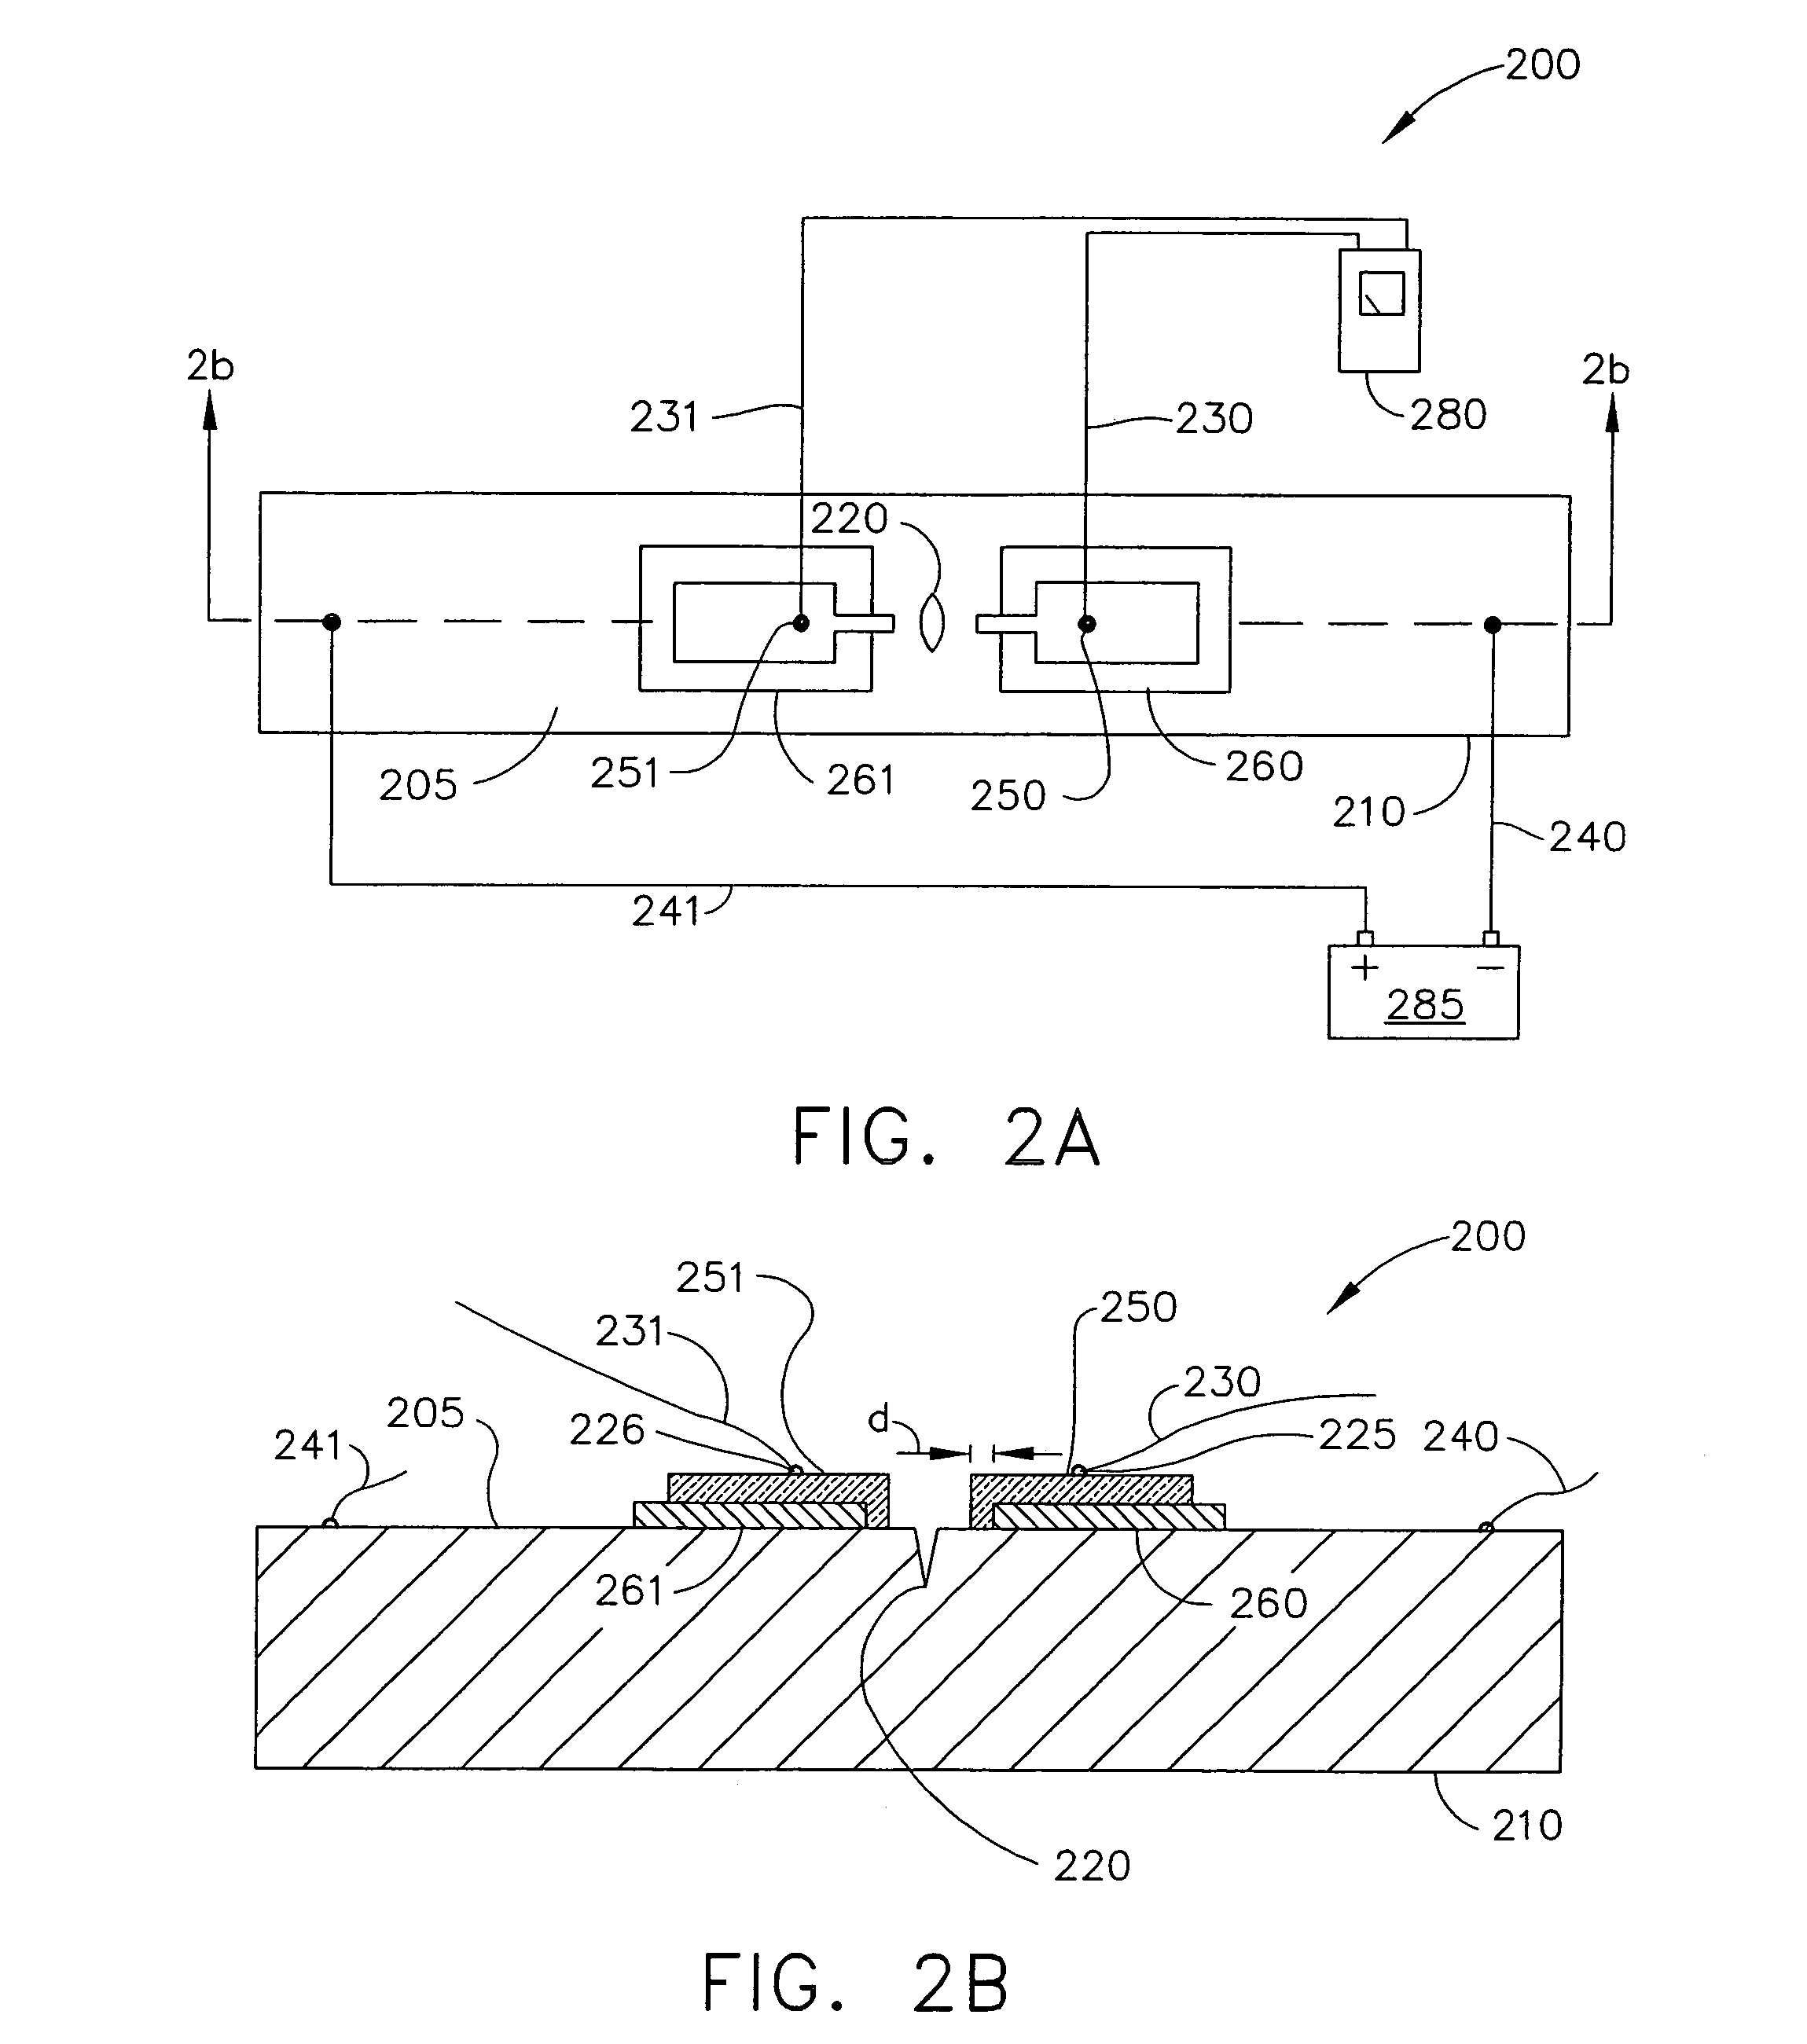 Instrumentation and method for monitoring change in electric potential to detect crack growth